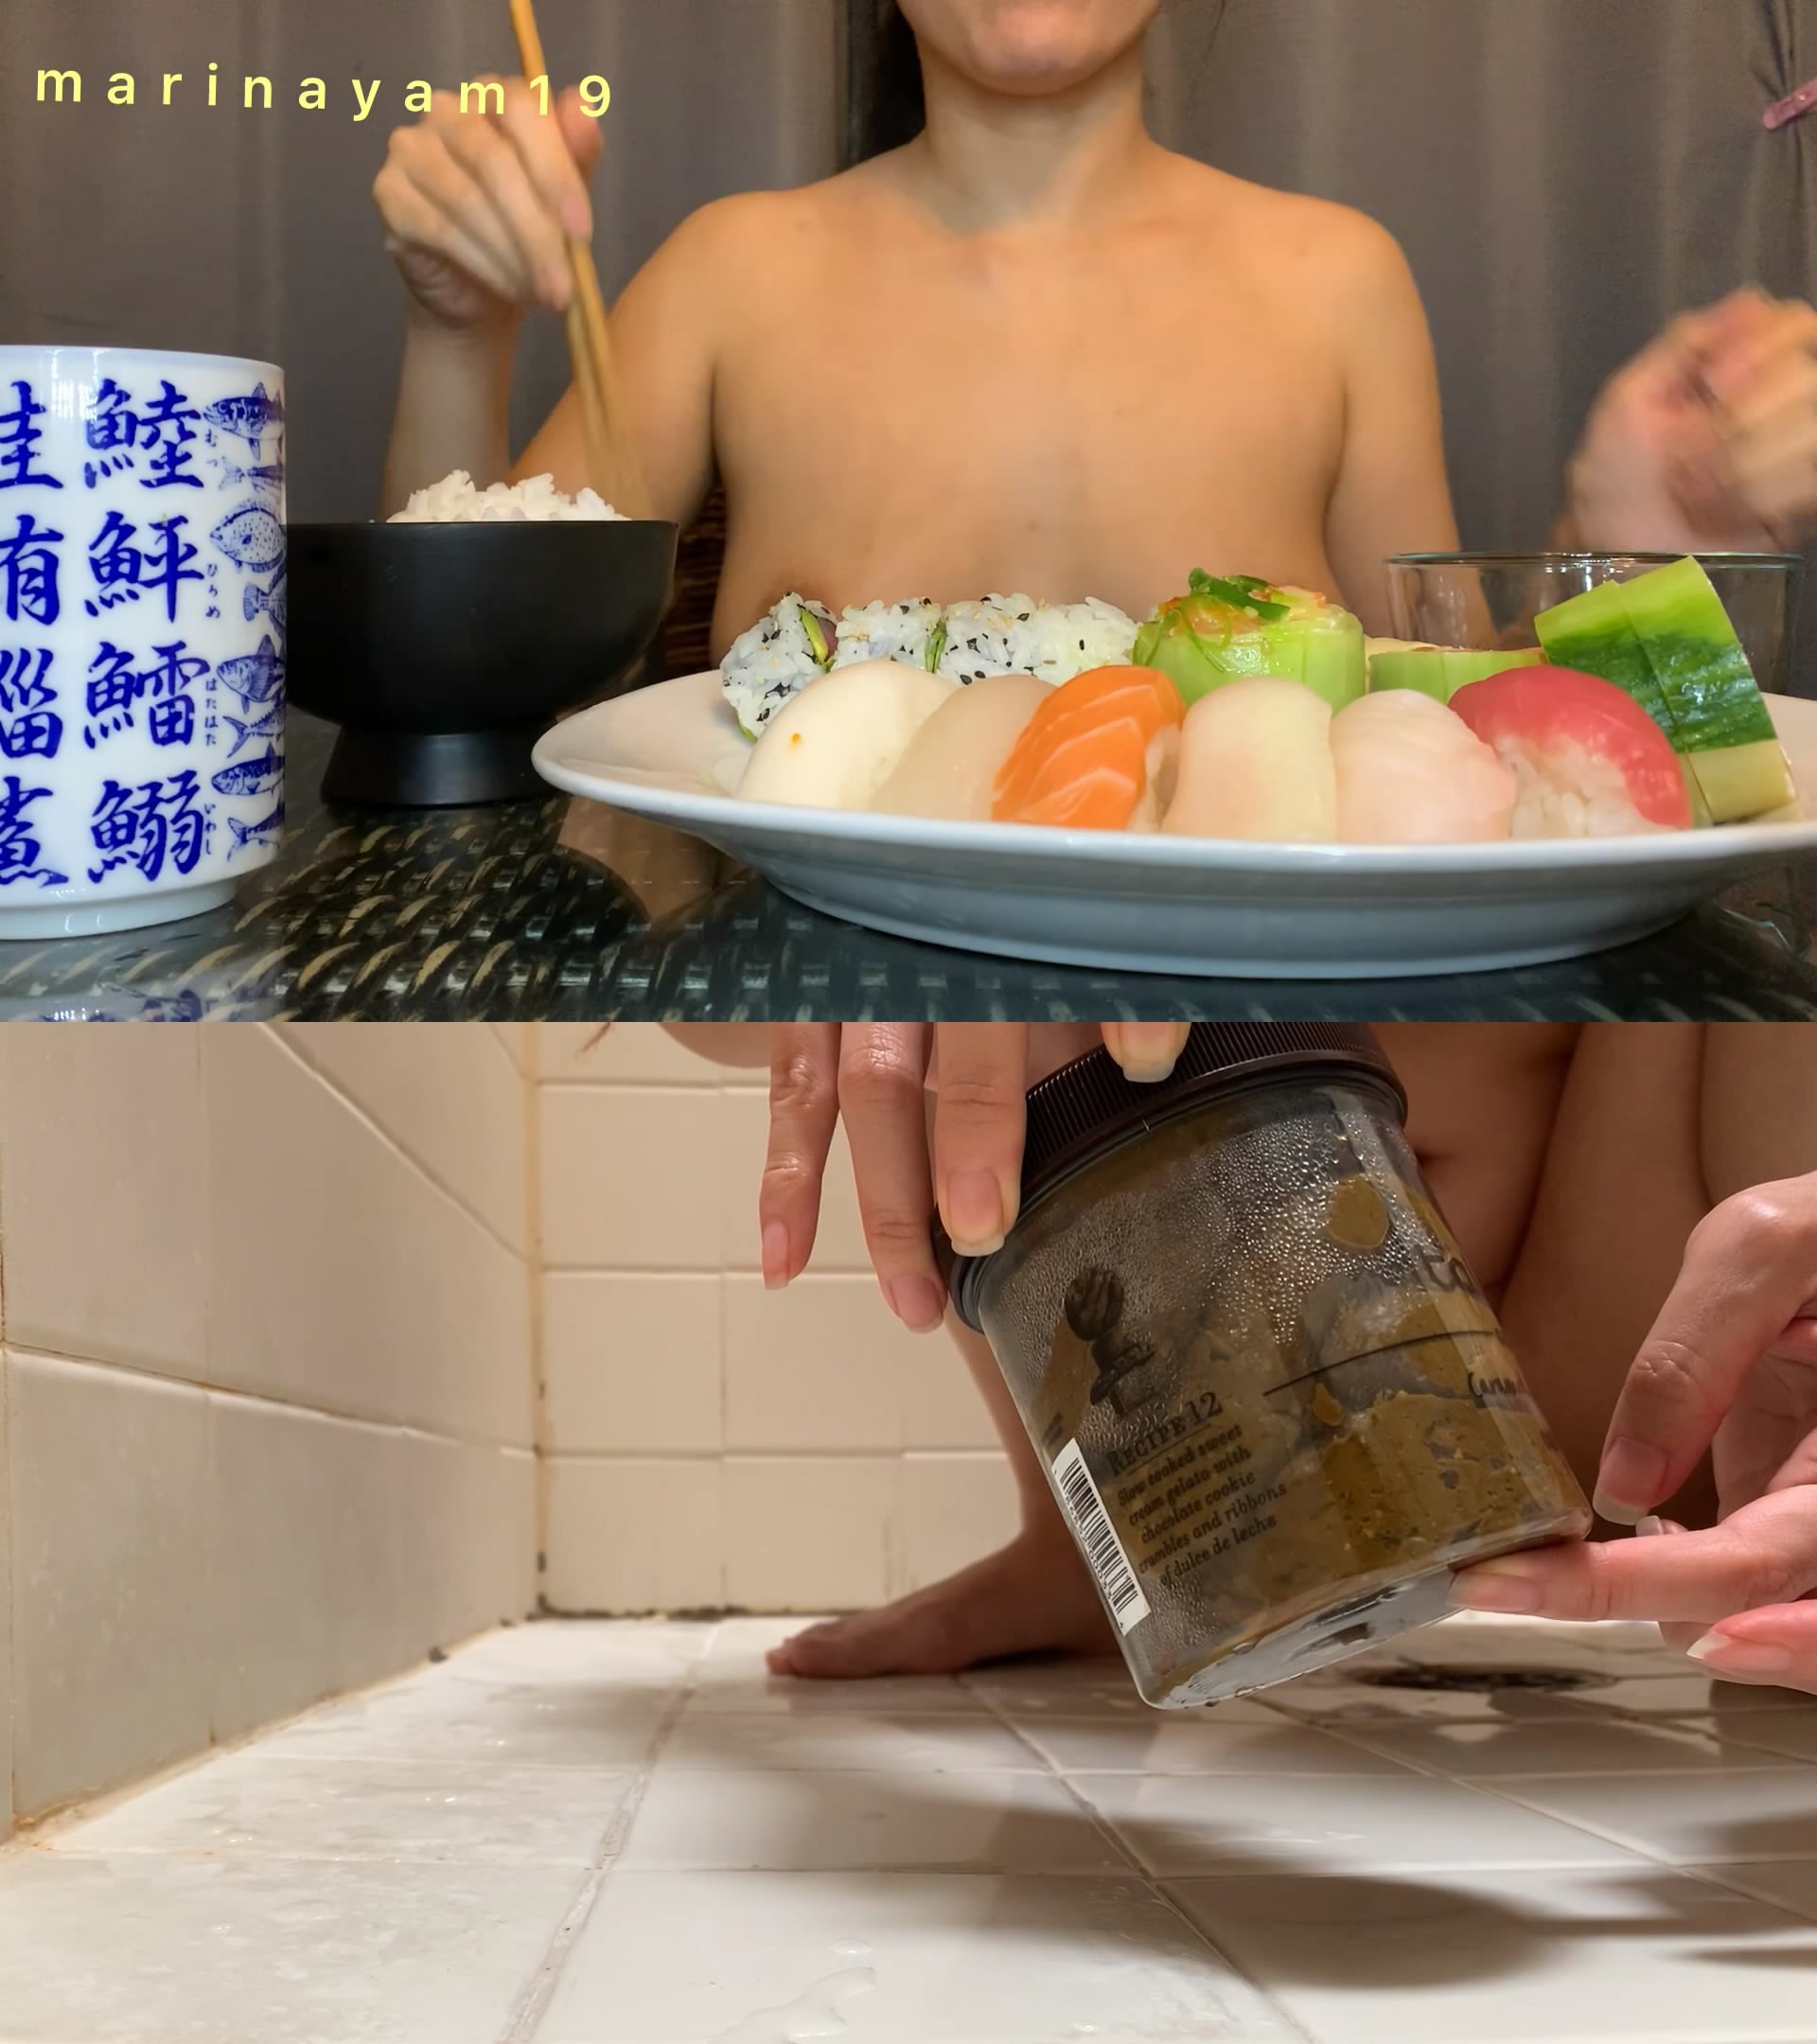 Triple loads and Pee after sushi starring in video Marinayam19 ($17.99 ScatShop)